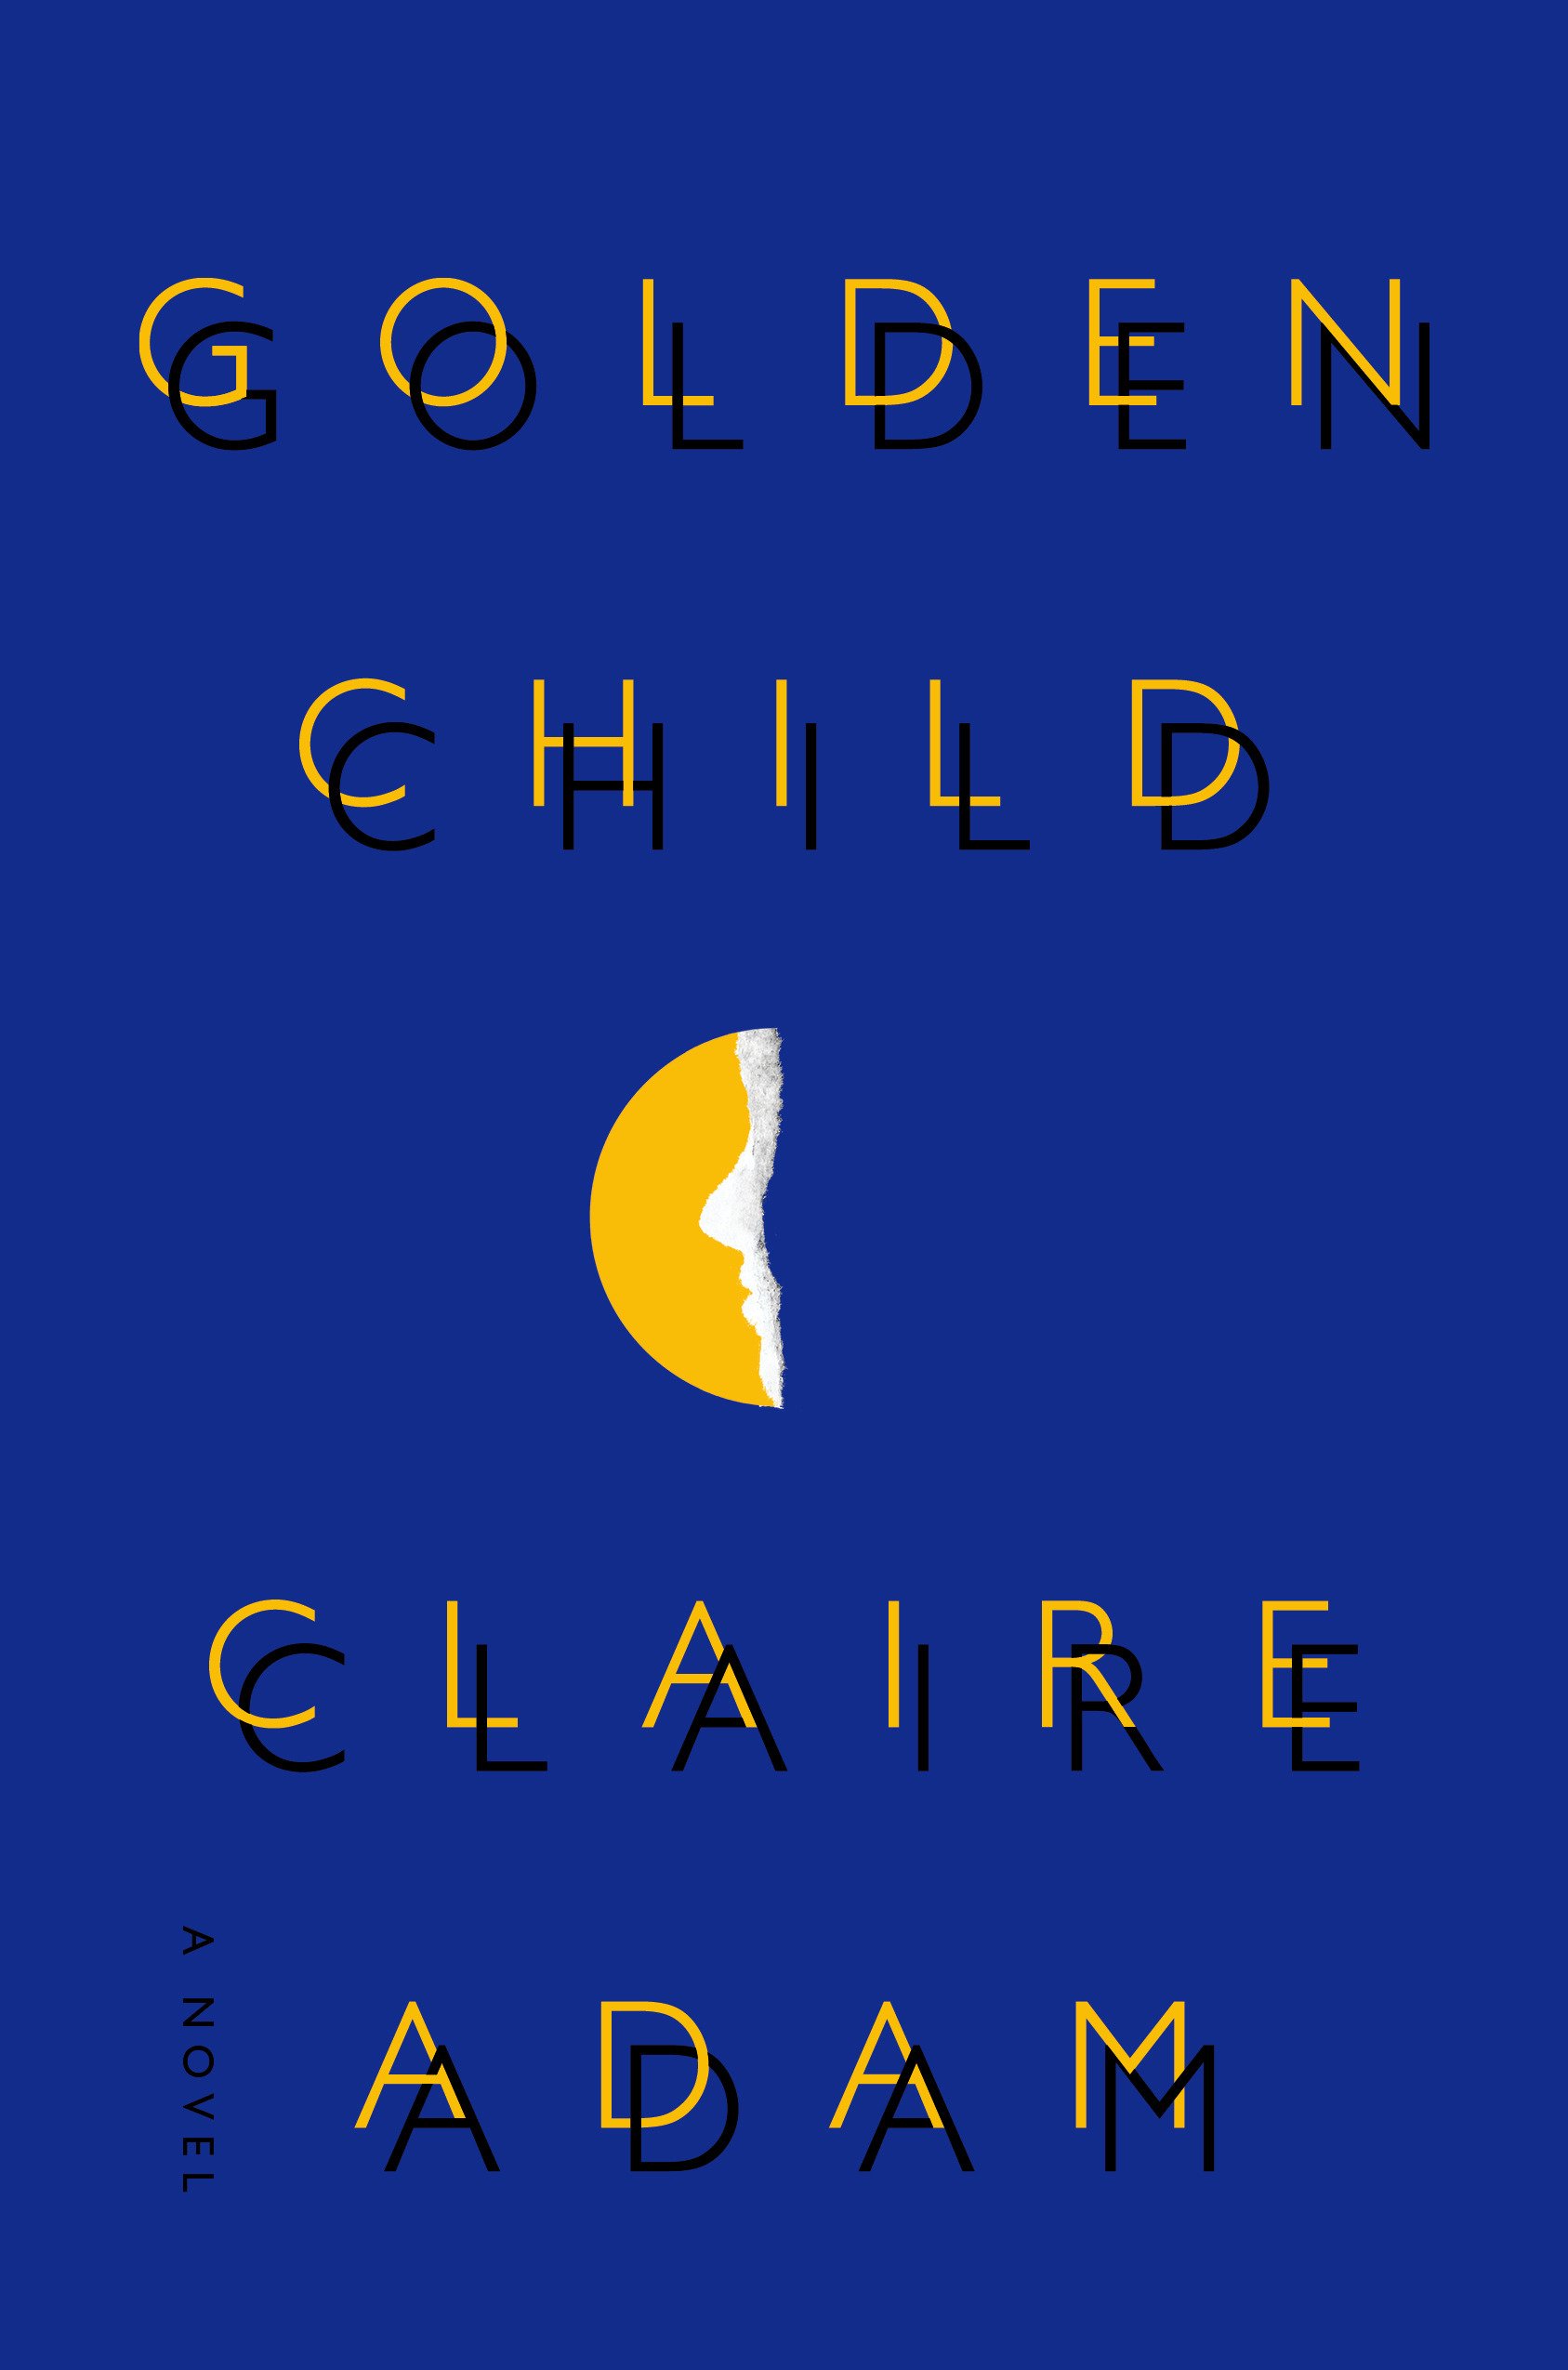 Great new books by diverse women authors: Golden Child by Claire Adam